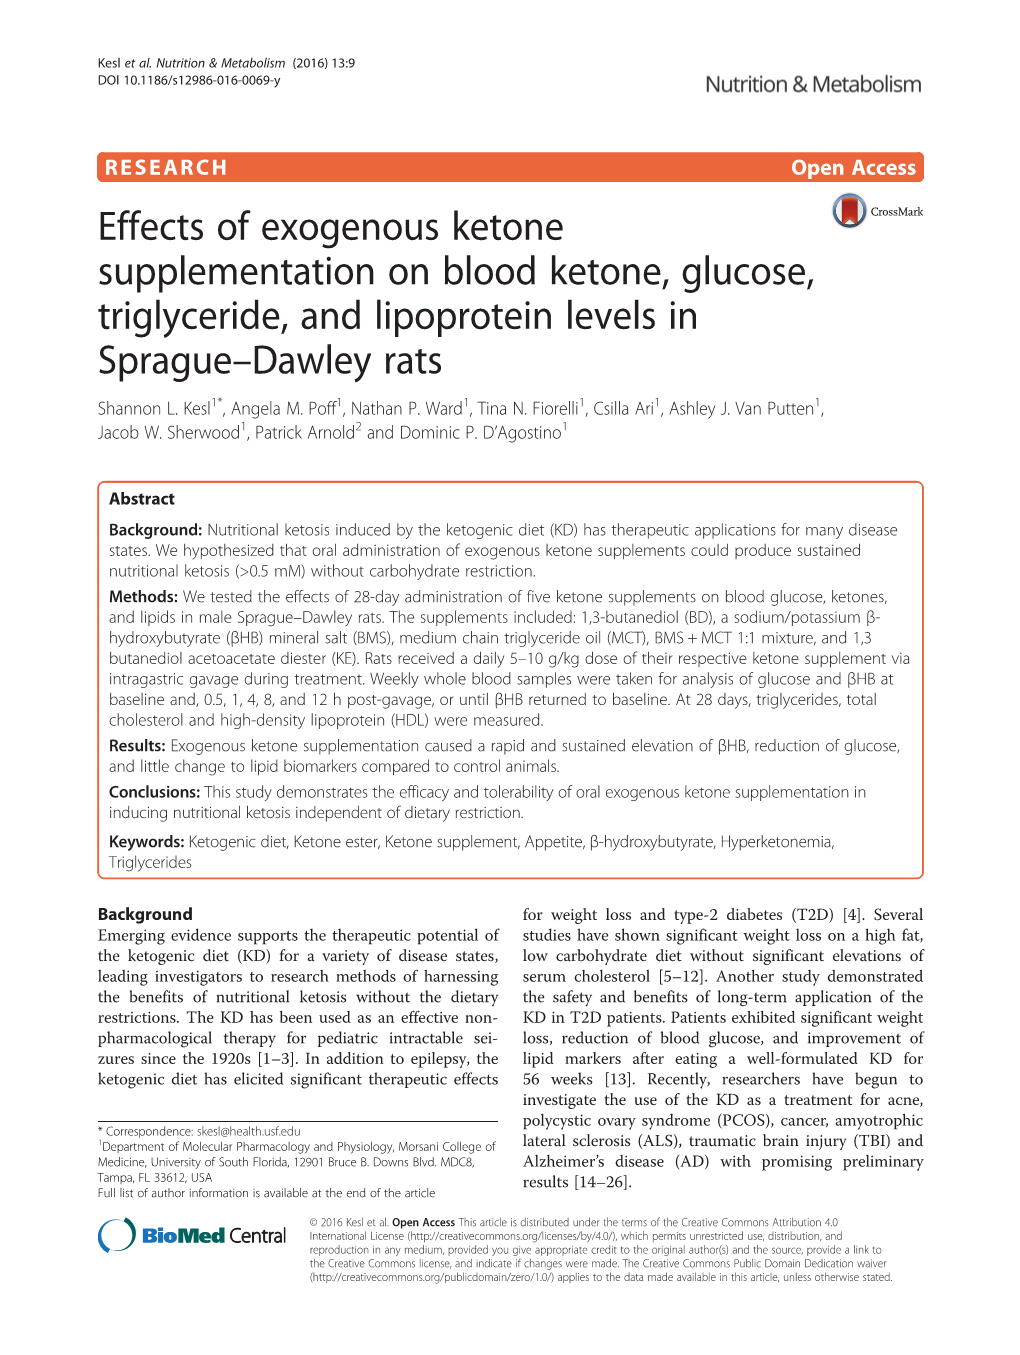 Effects of Exogenous Ketone Supplementation on Blood Ketone, Glucose, Triglyceride, and Lipoprotein Levels in Sprague–Dawley Rats Shannon L